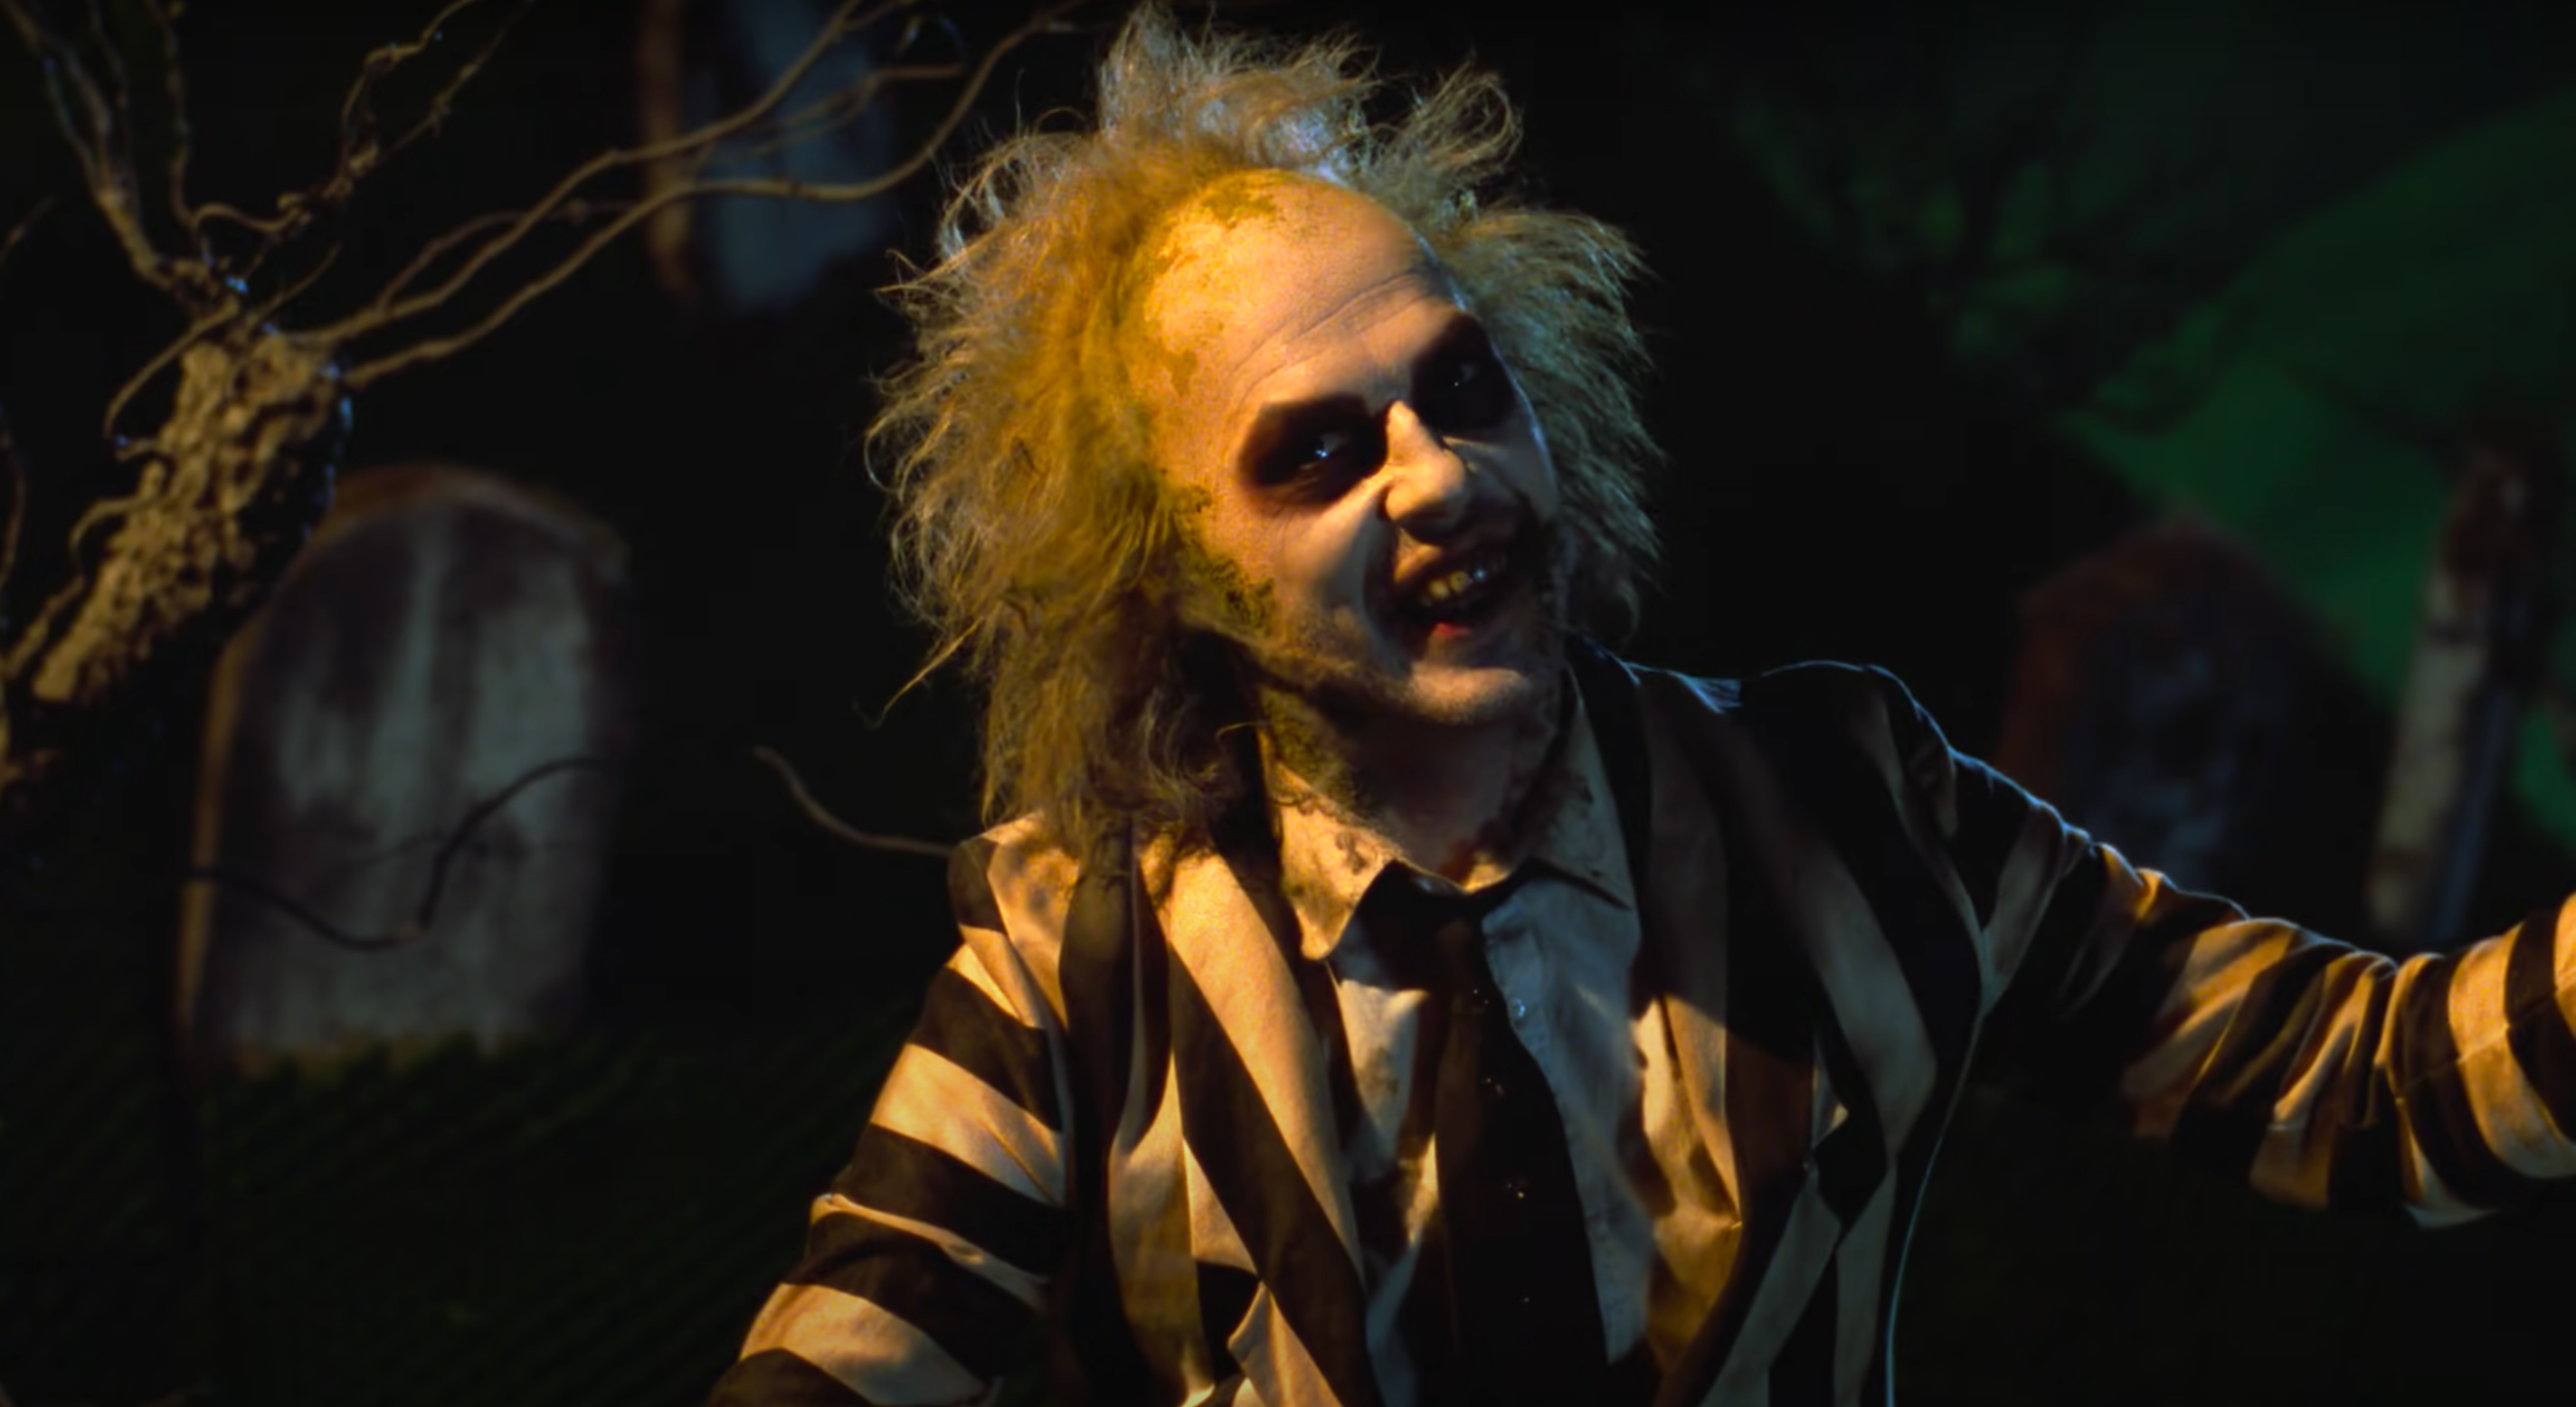 Brad Pitt’s production company Plan B to bring Beetlejuice sequel back to life